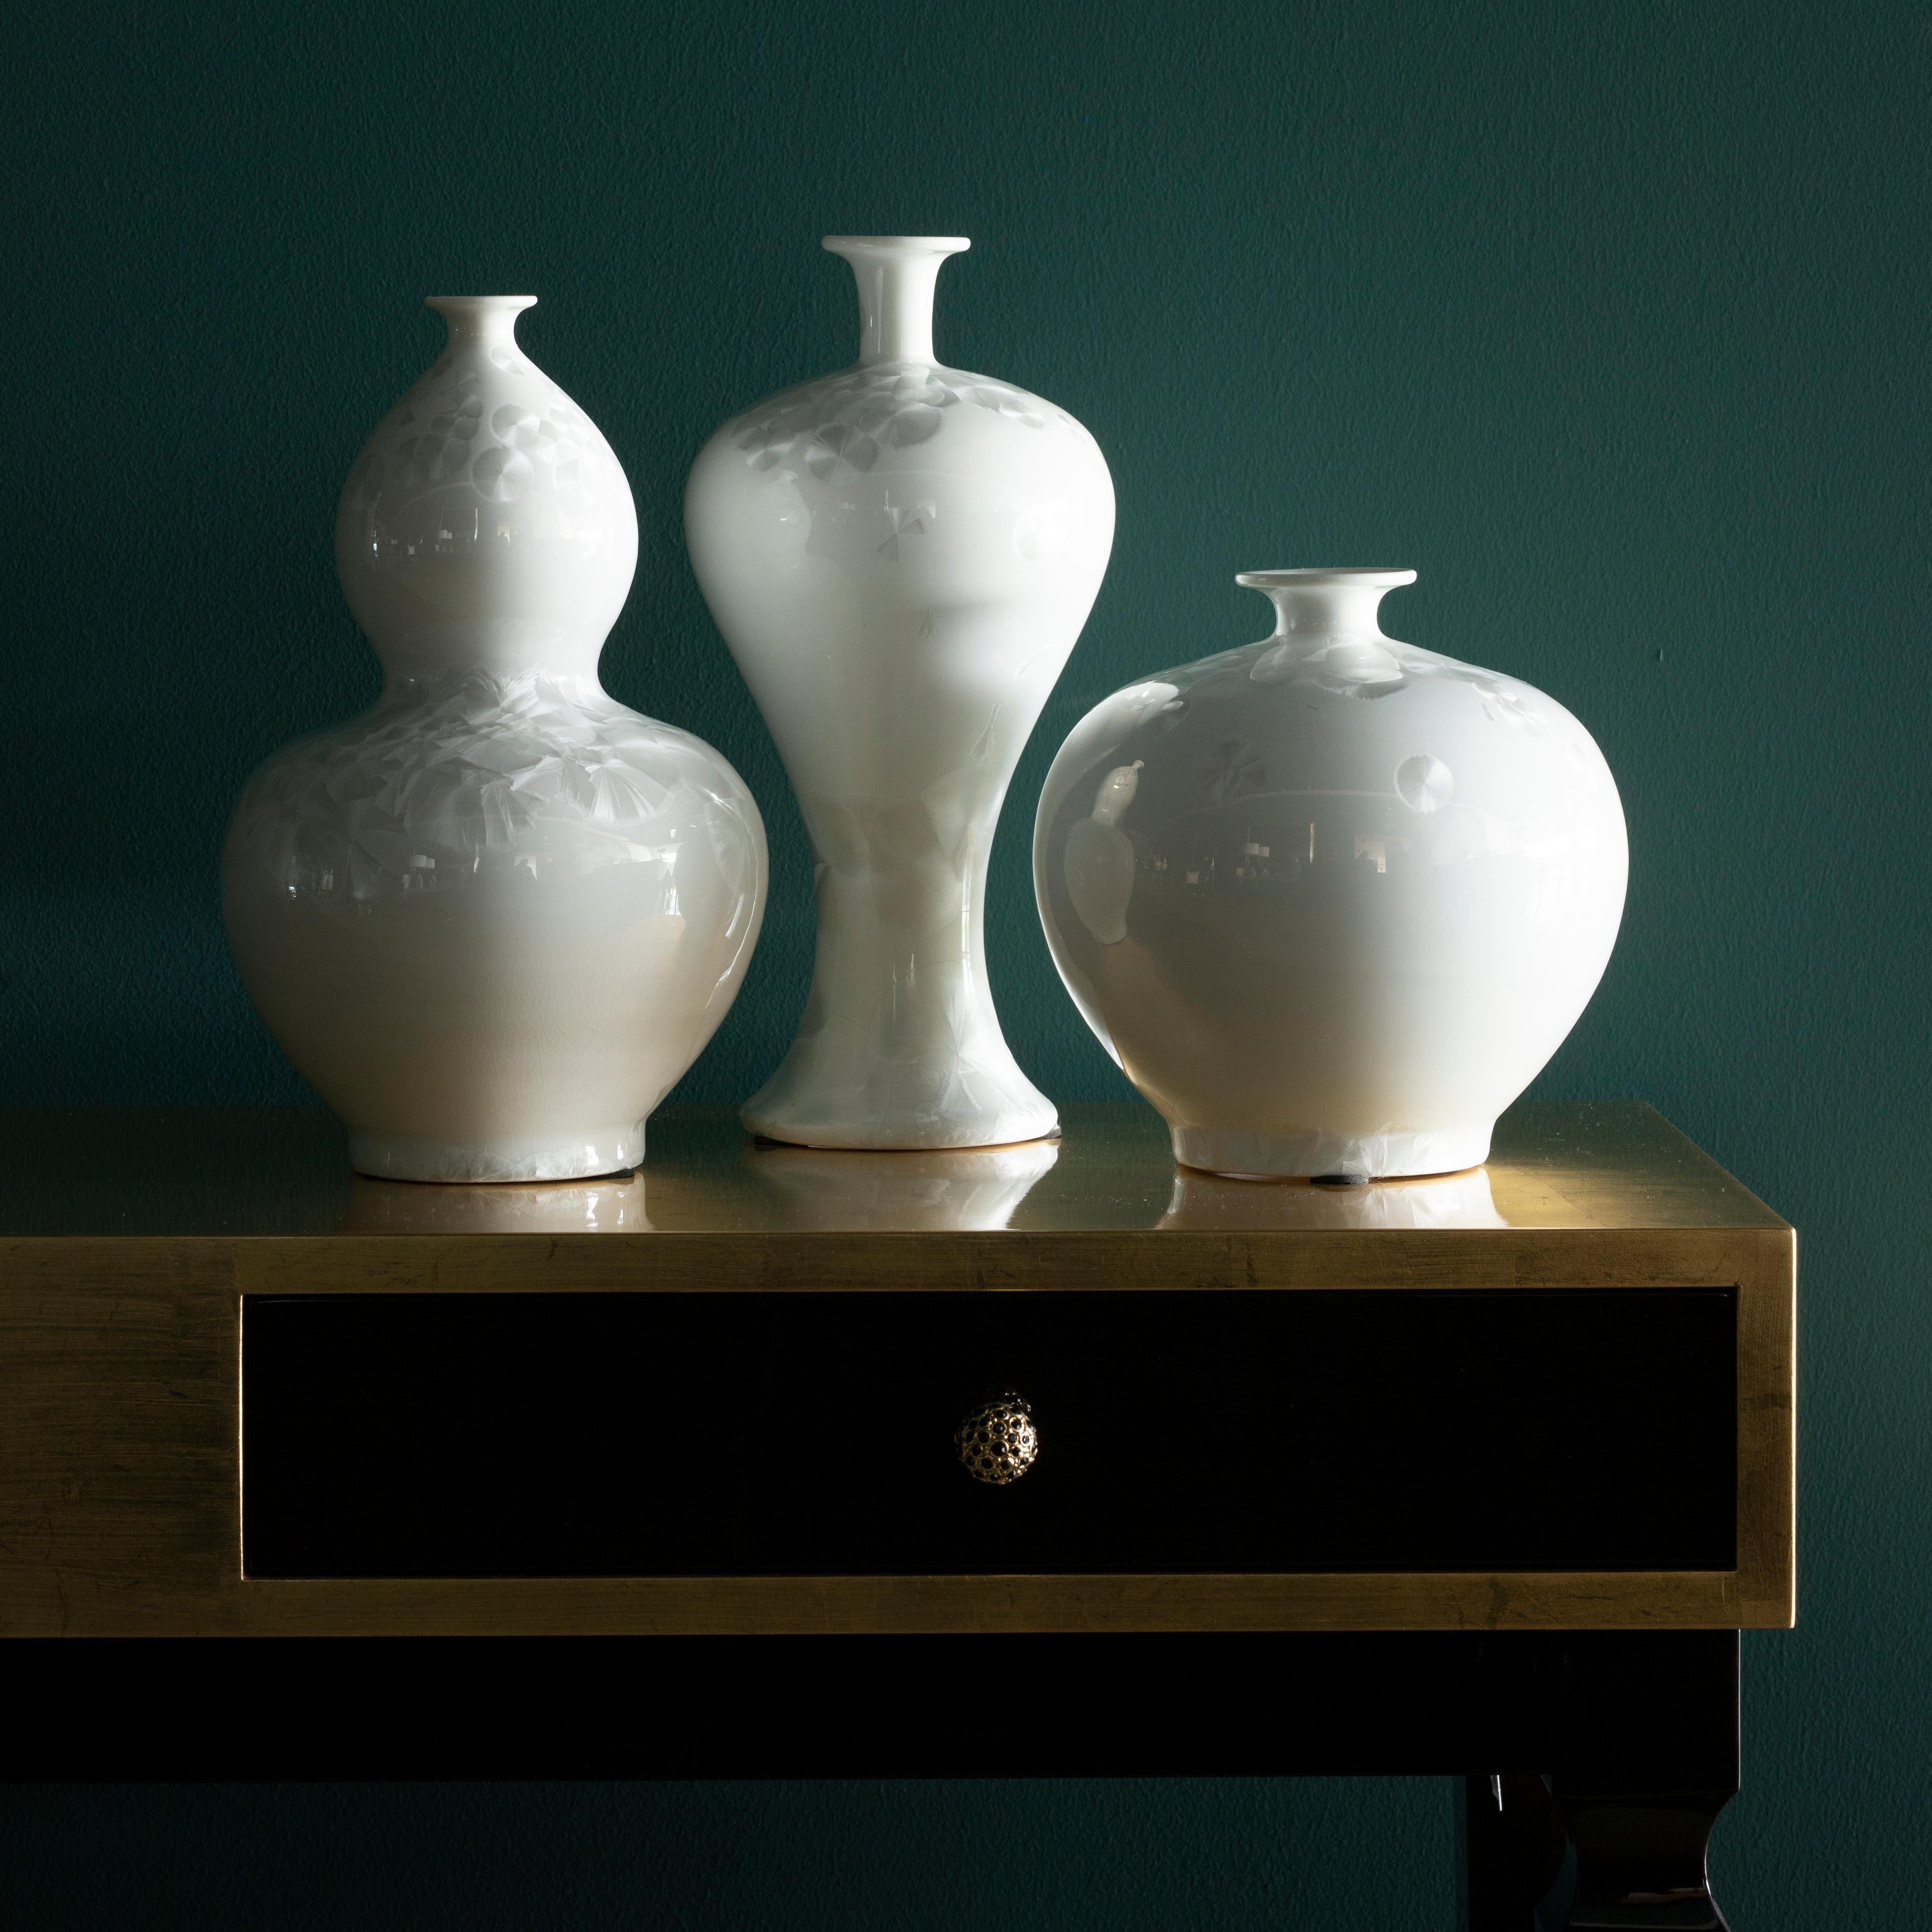 Set/3 DiaoChan Porcelain Vases, Lusitanus Home Collection by Lusitanus Home.

Real chinese porcelain vase produced by hand with traditional methods. Waterproof. The nacre finish makes each piece unique. The longtime relationship between Portugal and